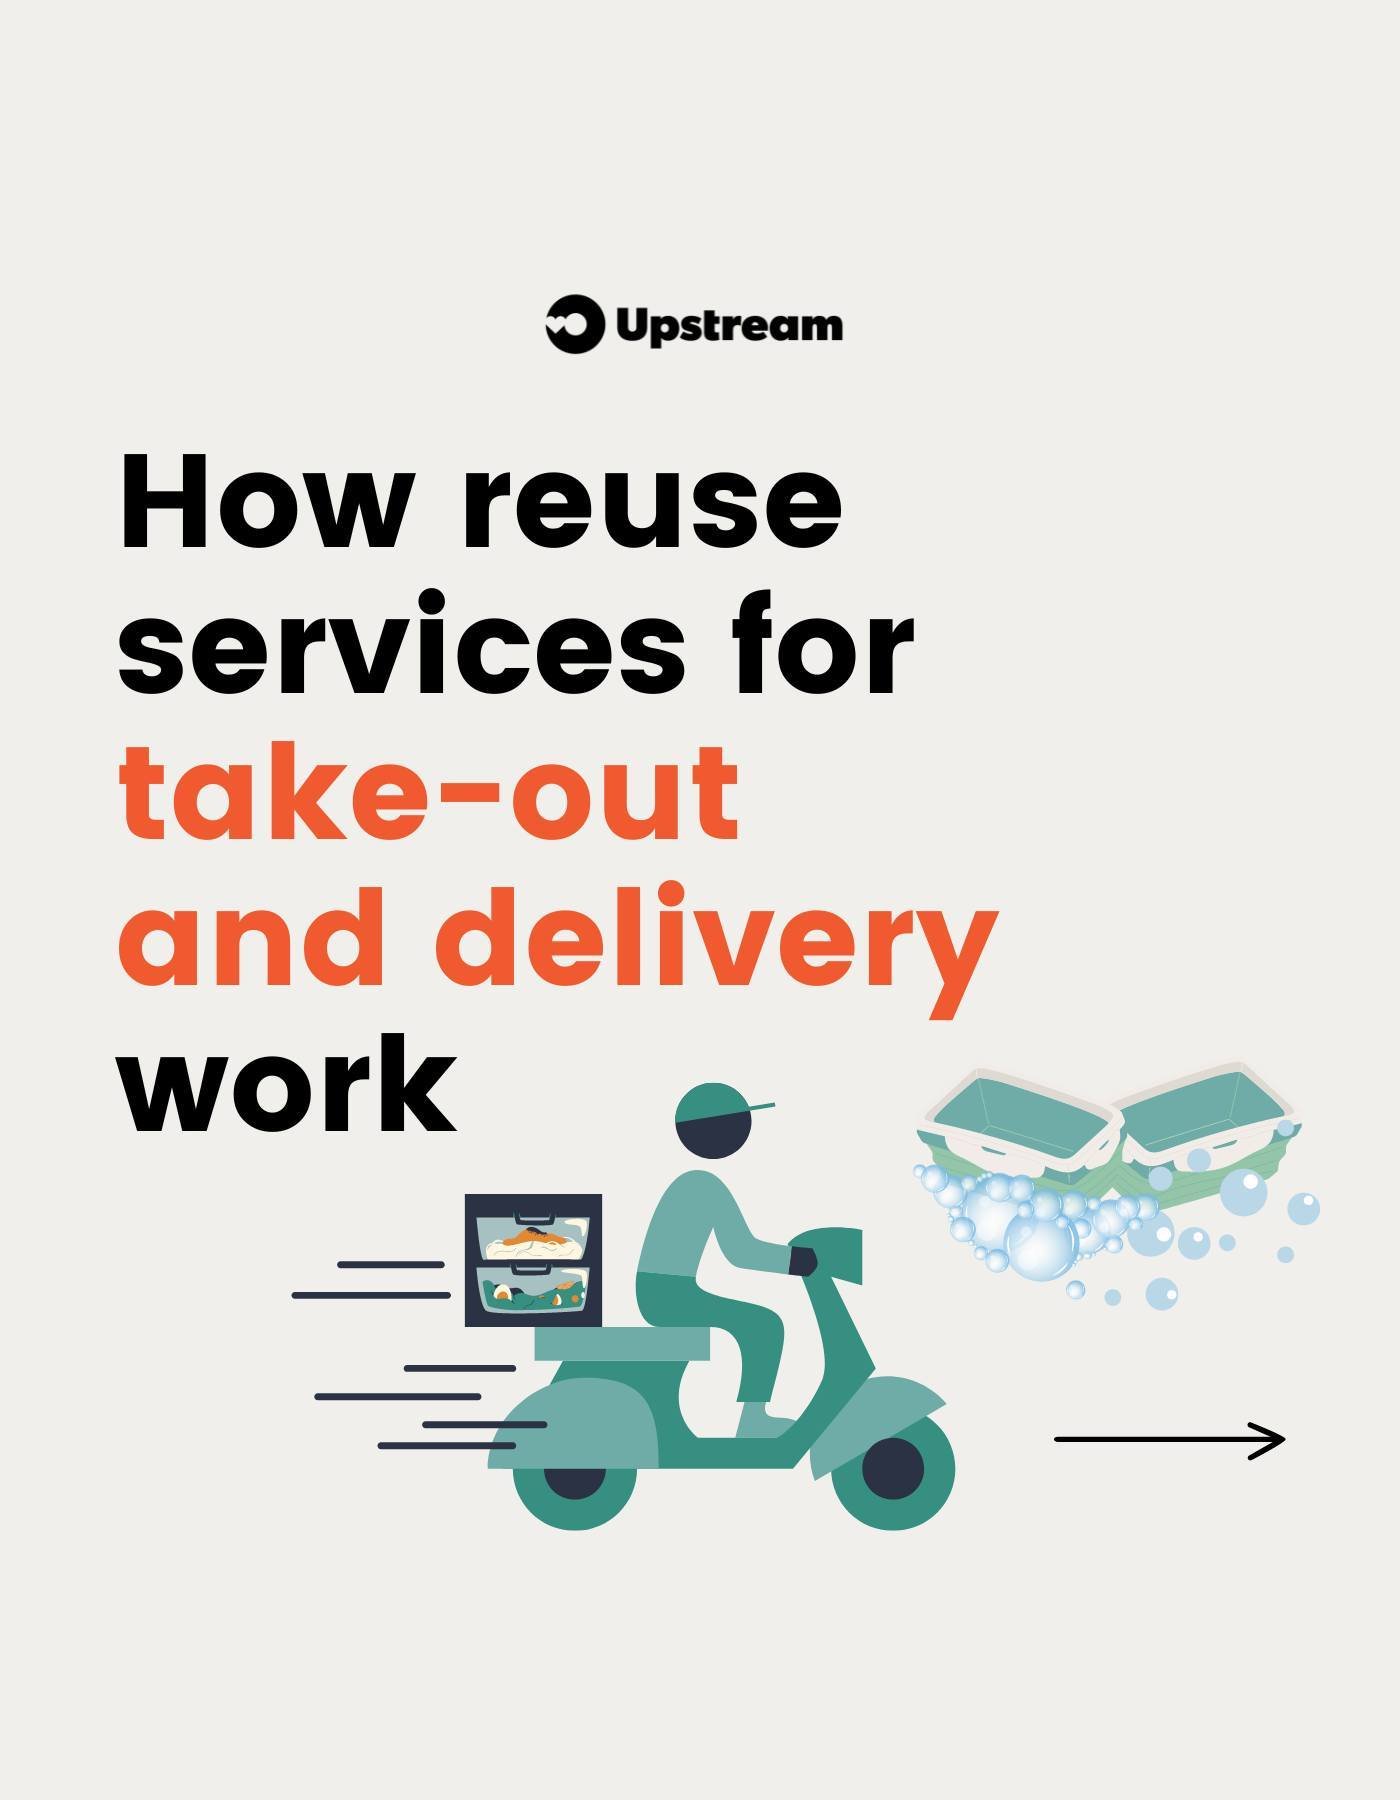 Easier than you thought, huh? 🤔♻️

Today, much of institutional and fast casual dining &ndash; and virtually all takeout and delivery &ndash; happens using disposable food-serviceware. 

And all those takeout containers, bags, boxes, condiment packe